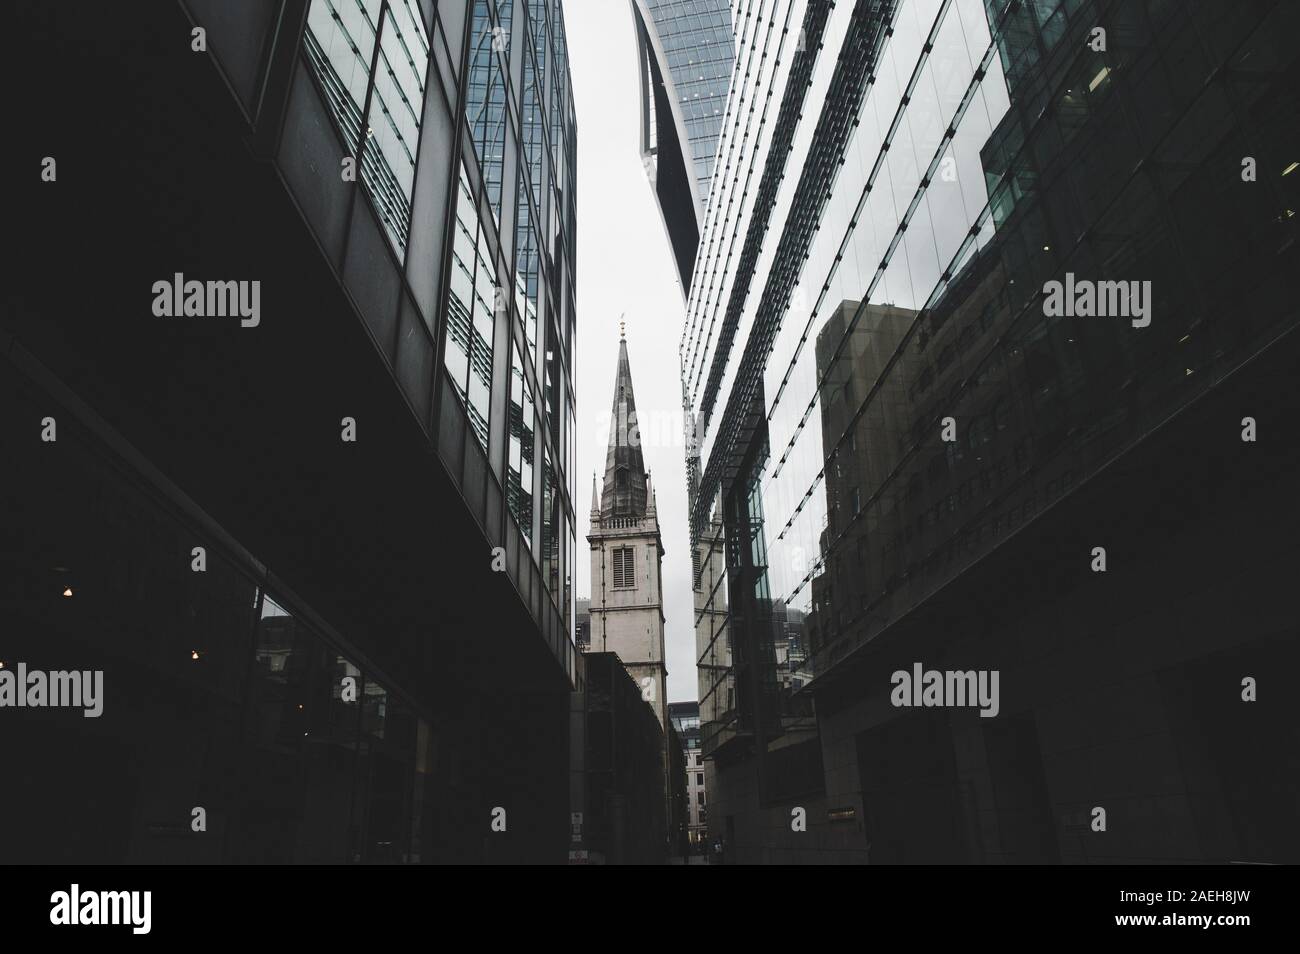 Saint Margaret Pattens Church of England in London. Stock Photo